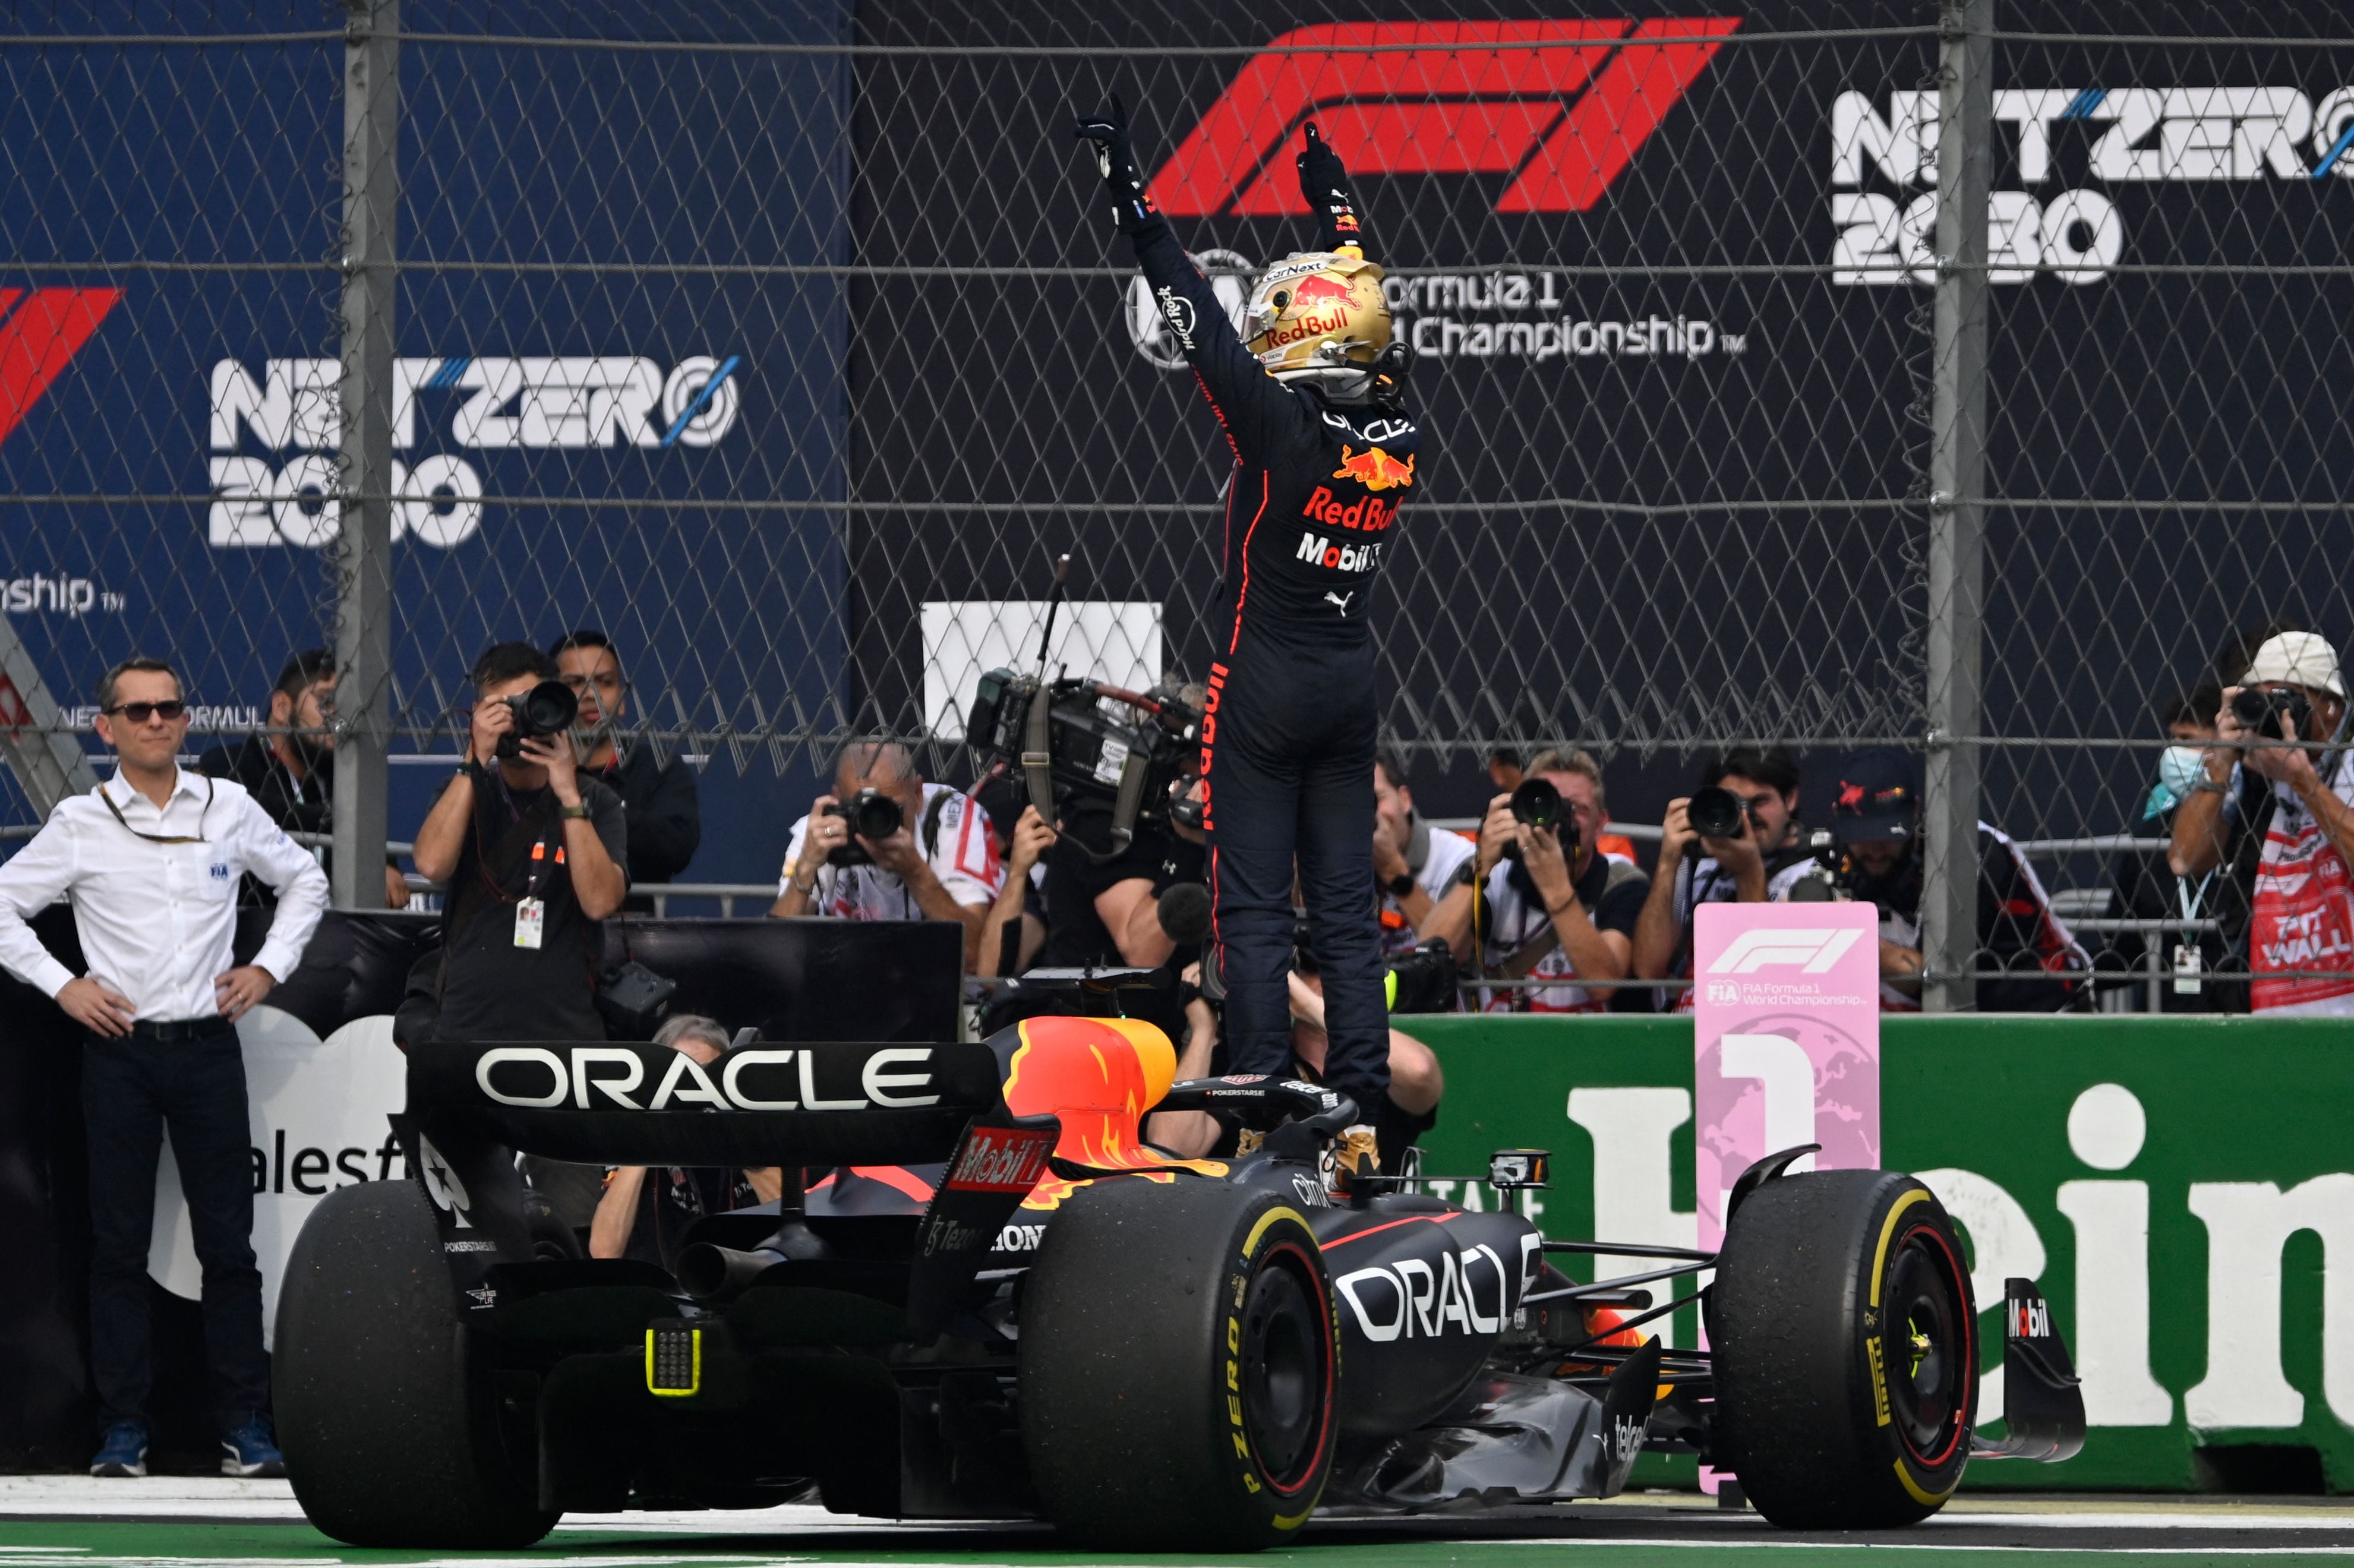 Max Verstappen cruised to a comfortable win at the Mexican Grand Prix